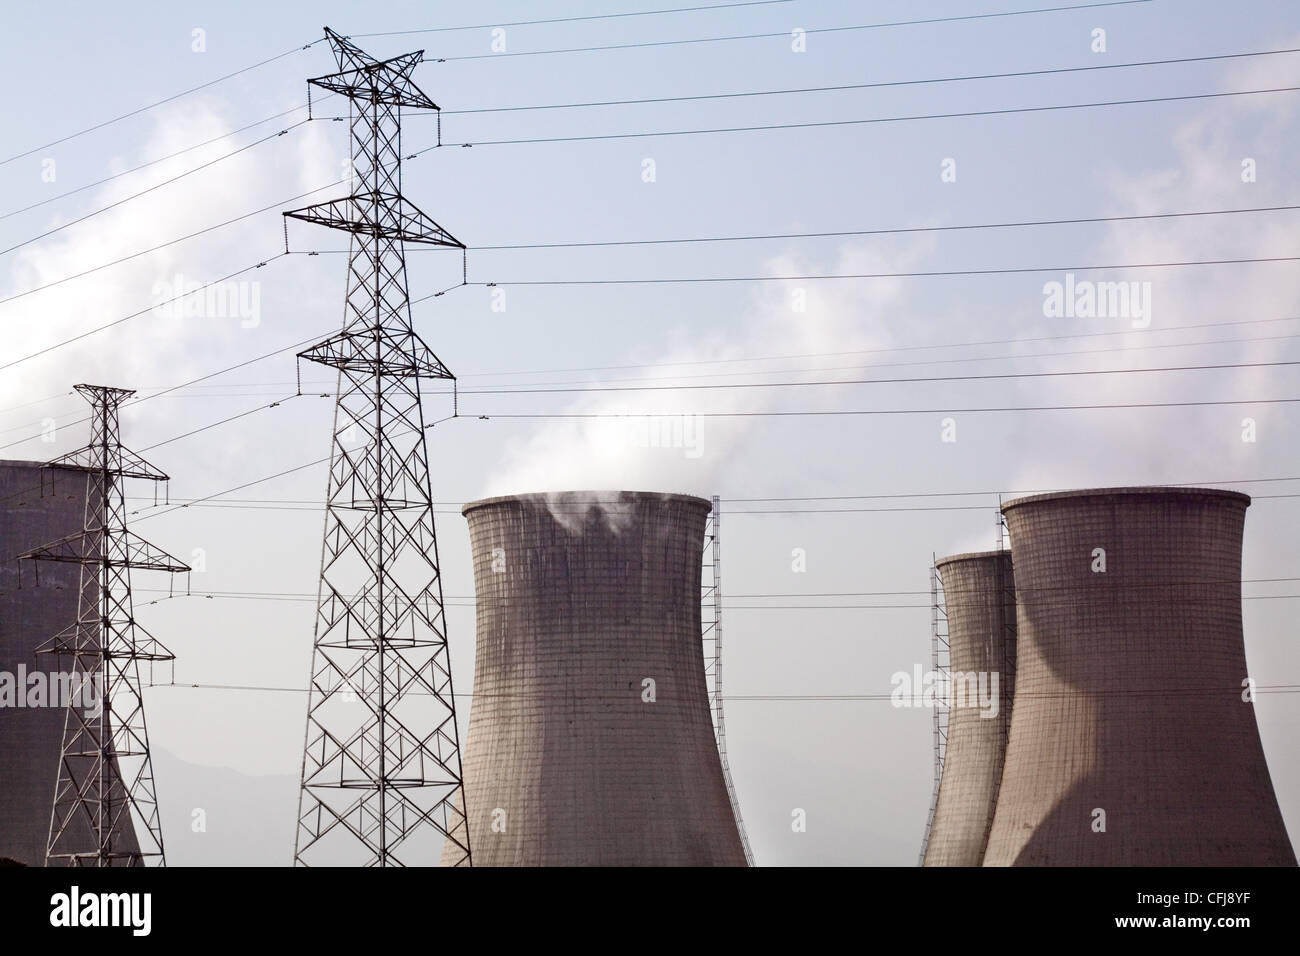 Electricity Pylon and Cooling Tower, Fuel and Power Generation Stock Photo